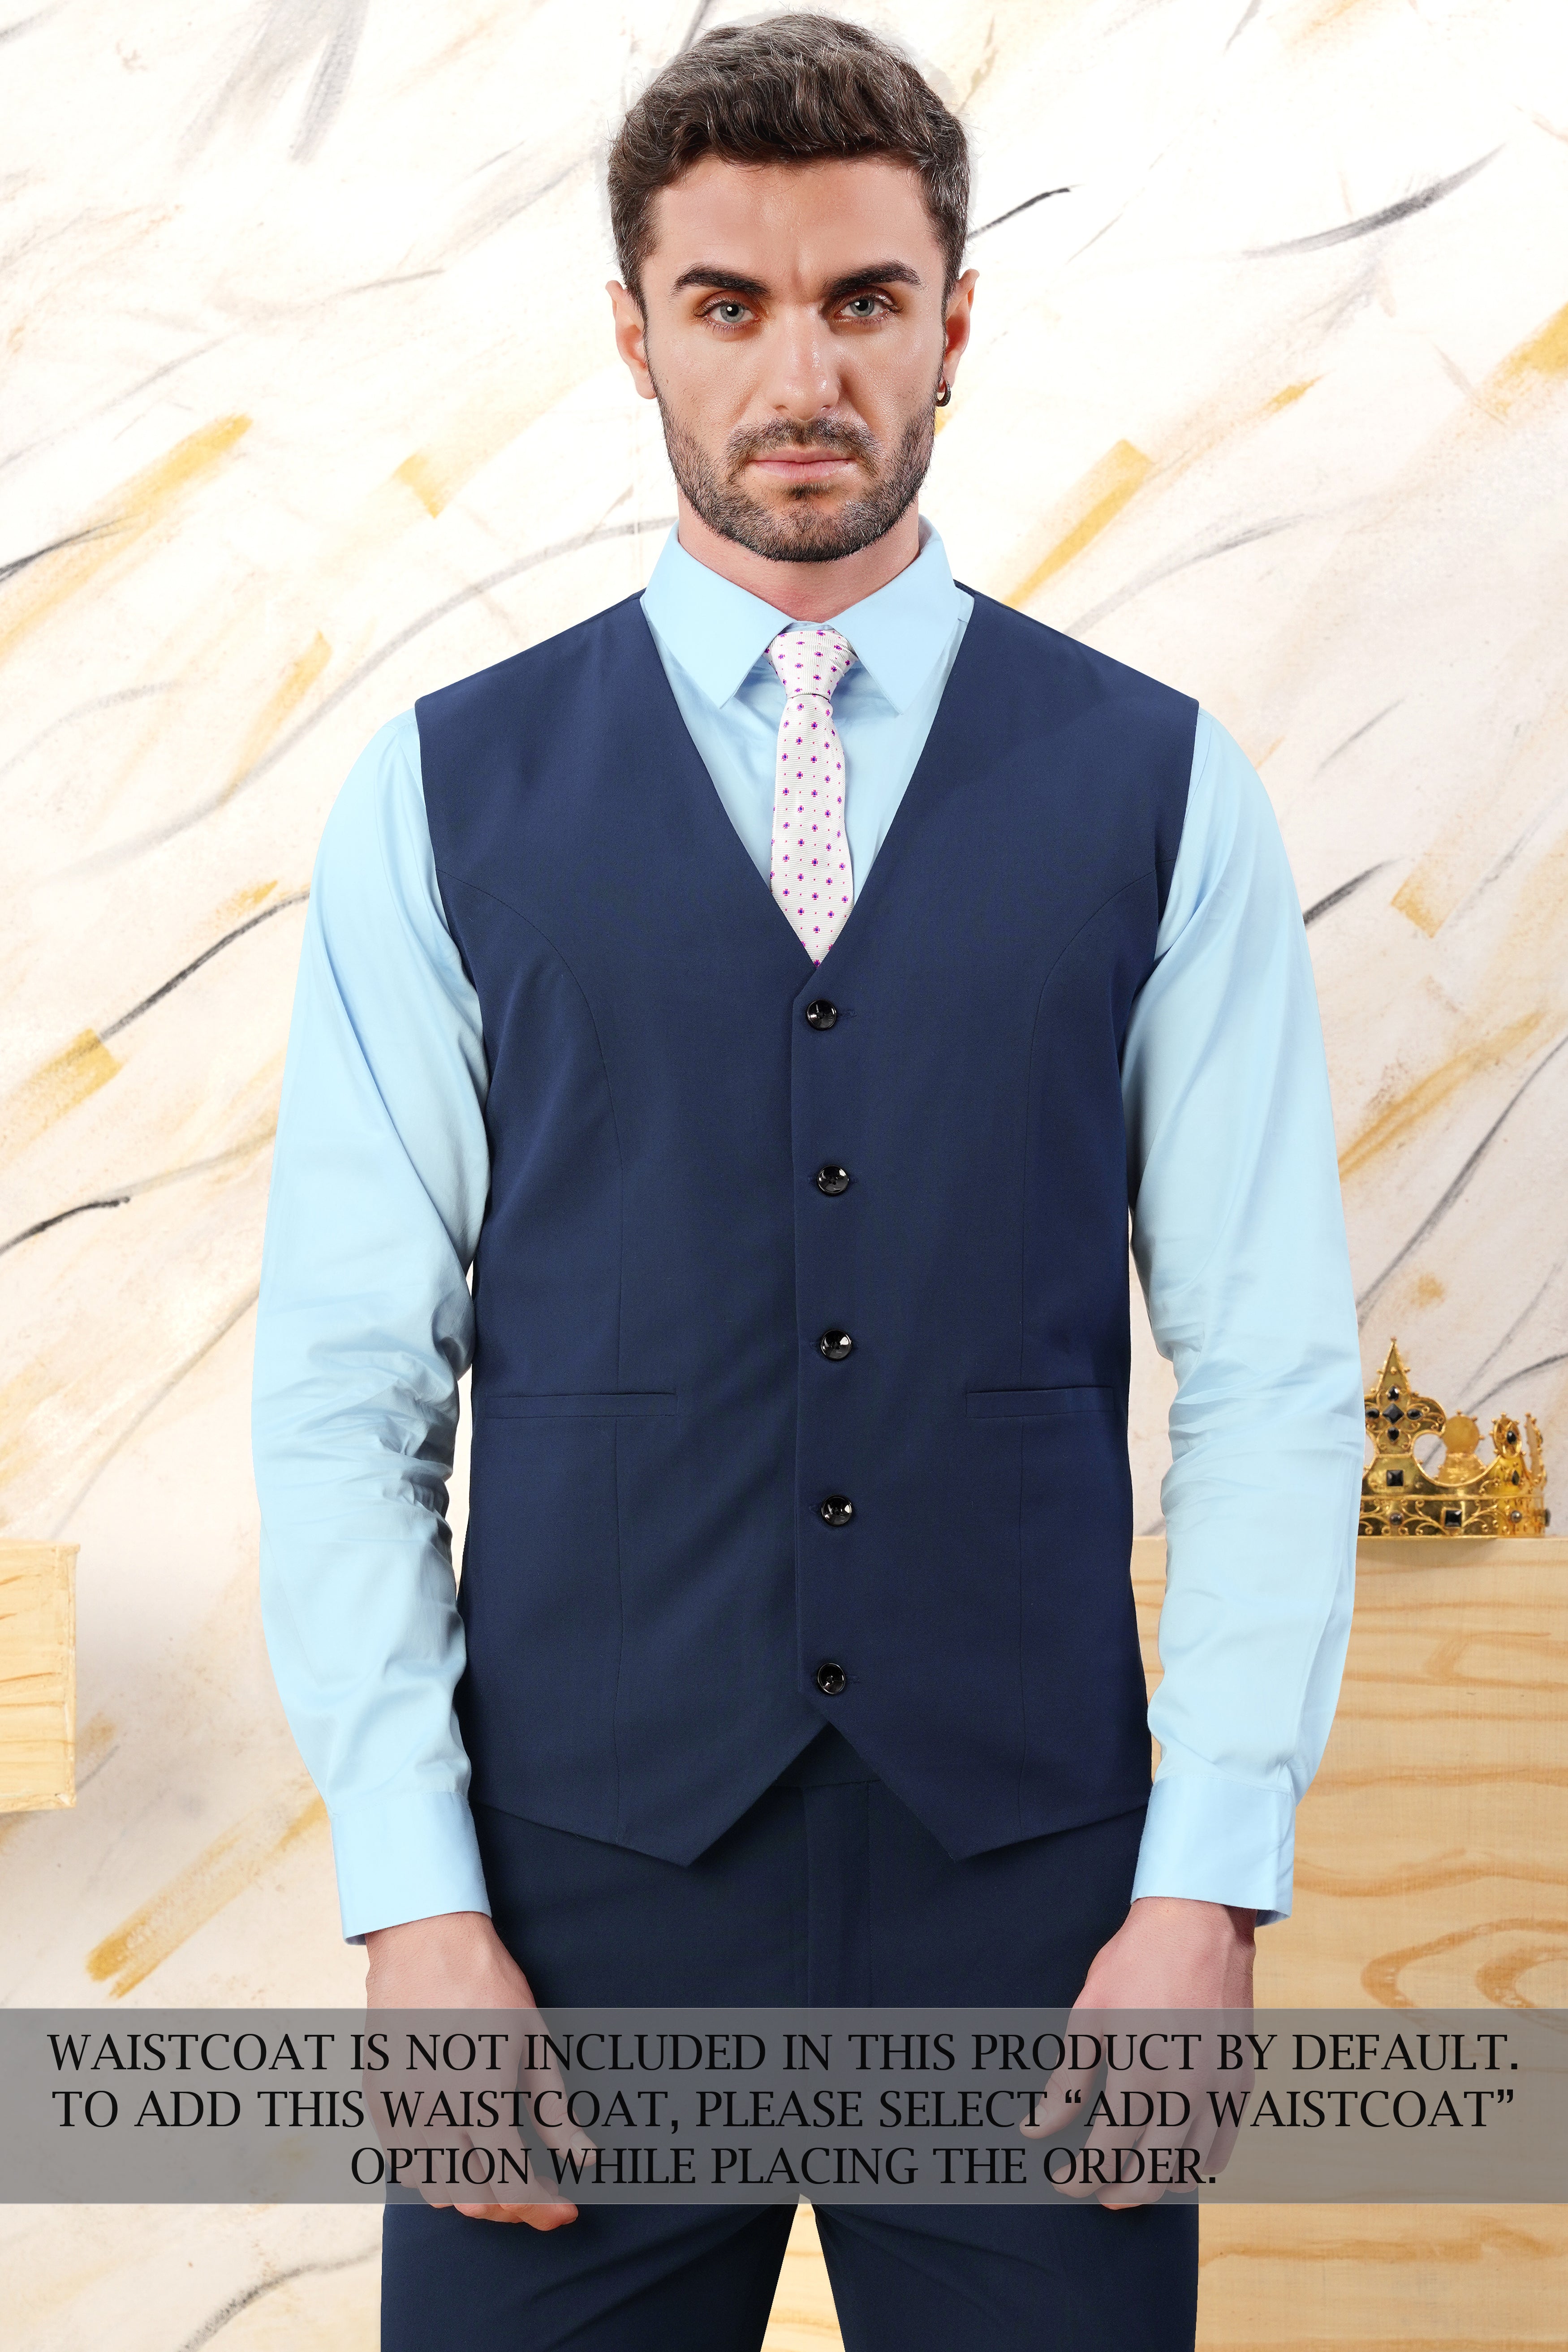 Cloud Burst Blue Wool Rich Double Breasted Stretchable Traveler  Suit ST3078-DB-36, ST3078-DB-38, ST3078-DB-40, ST3078-DB-42, ST3078-DB-44, ST3078-DB-46, ST3078-DB-48, ST3078-DB-50, ST3078-DB-52, ST3078-DB-54, ST3078-DB-56, ST3078-DB-58, ST3078-DB-60